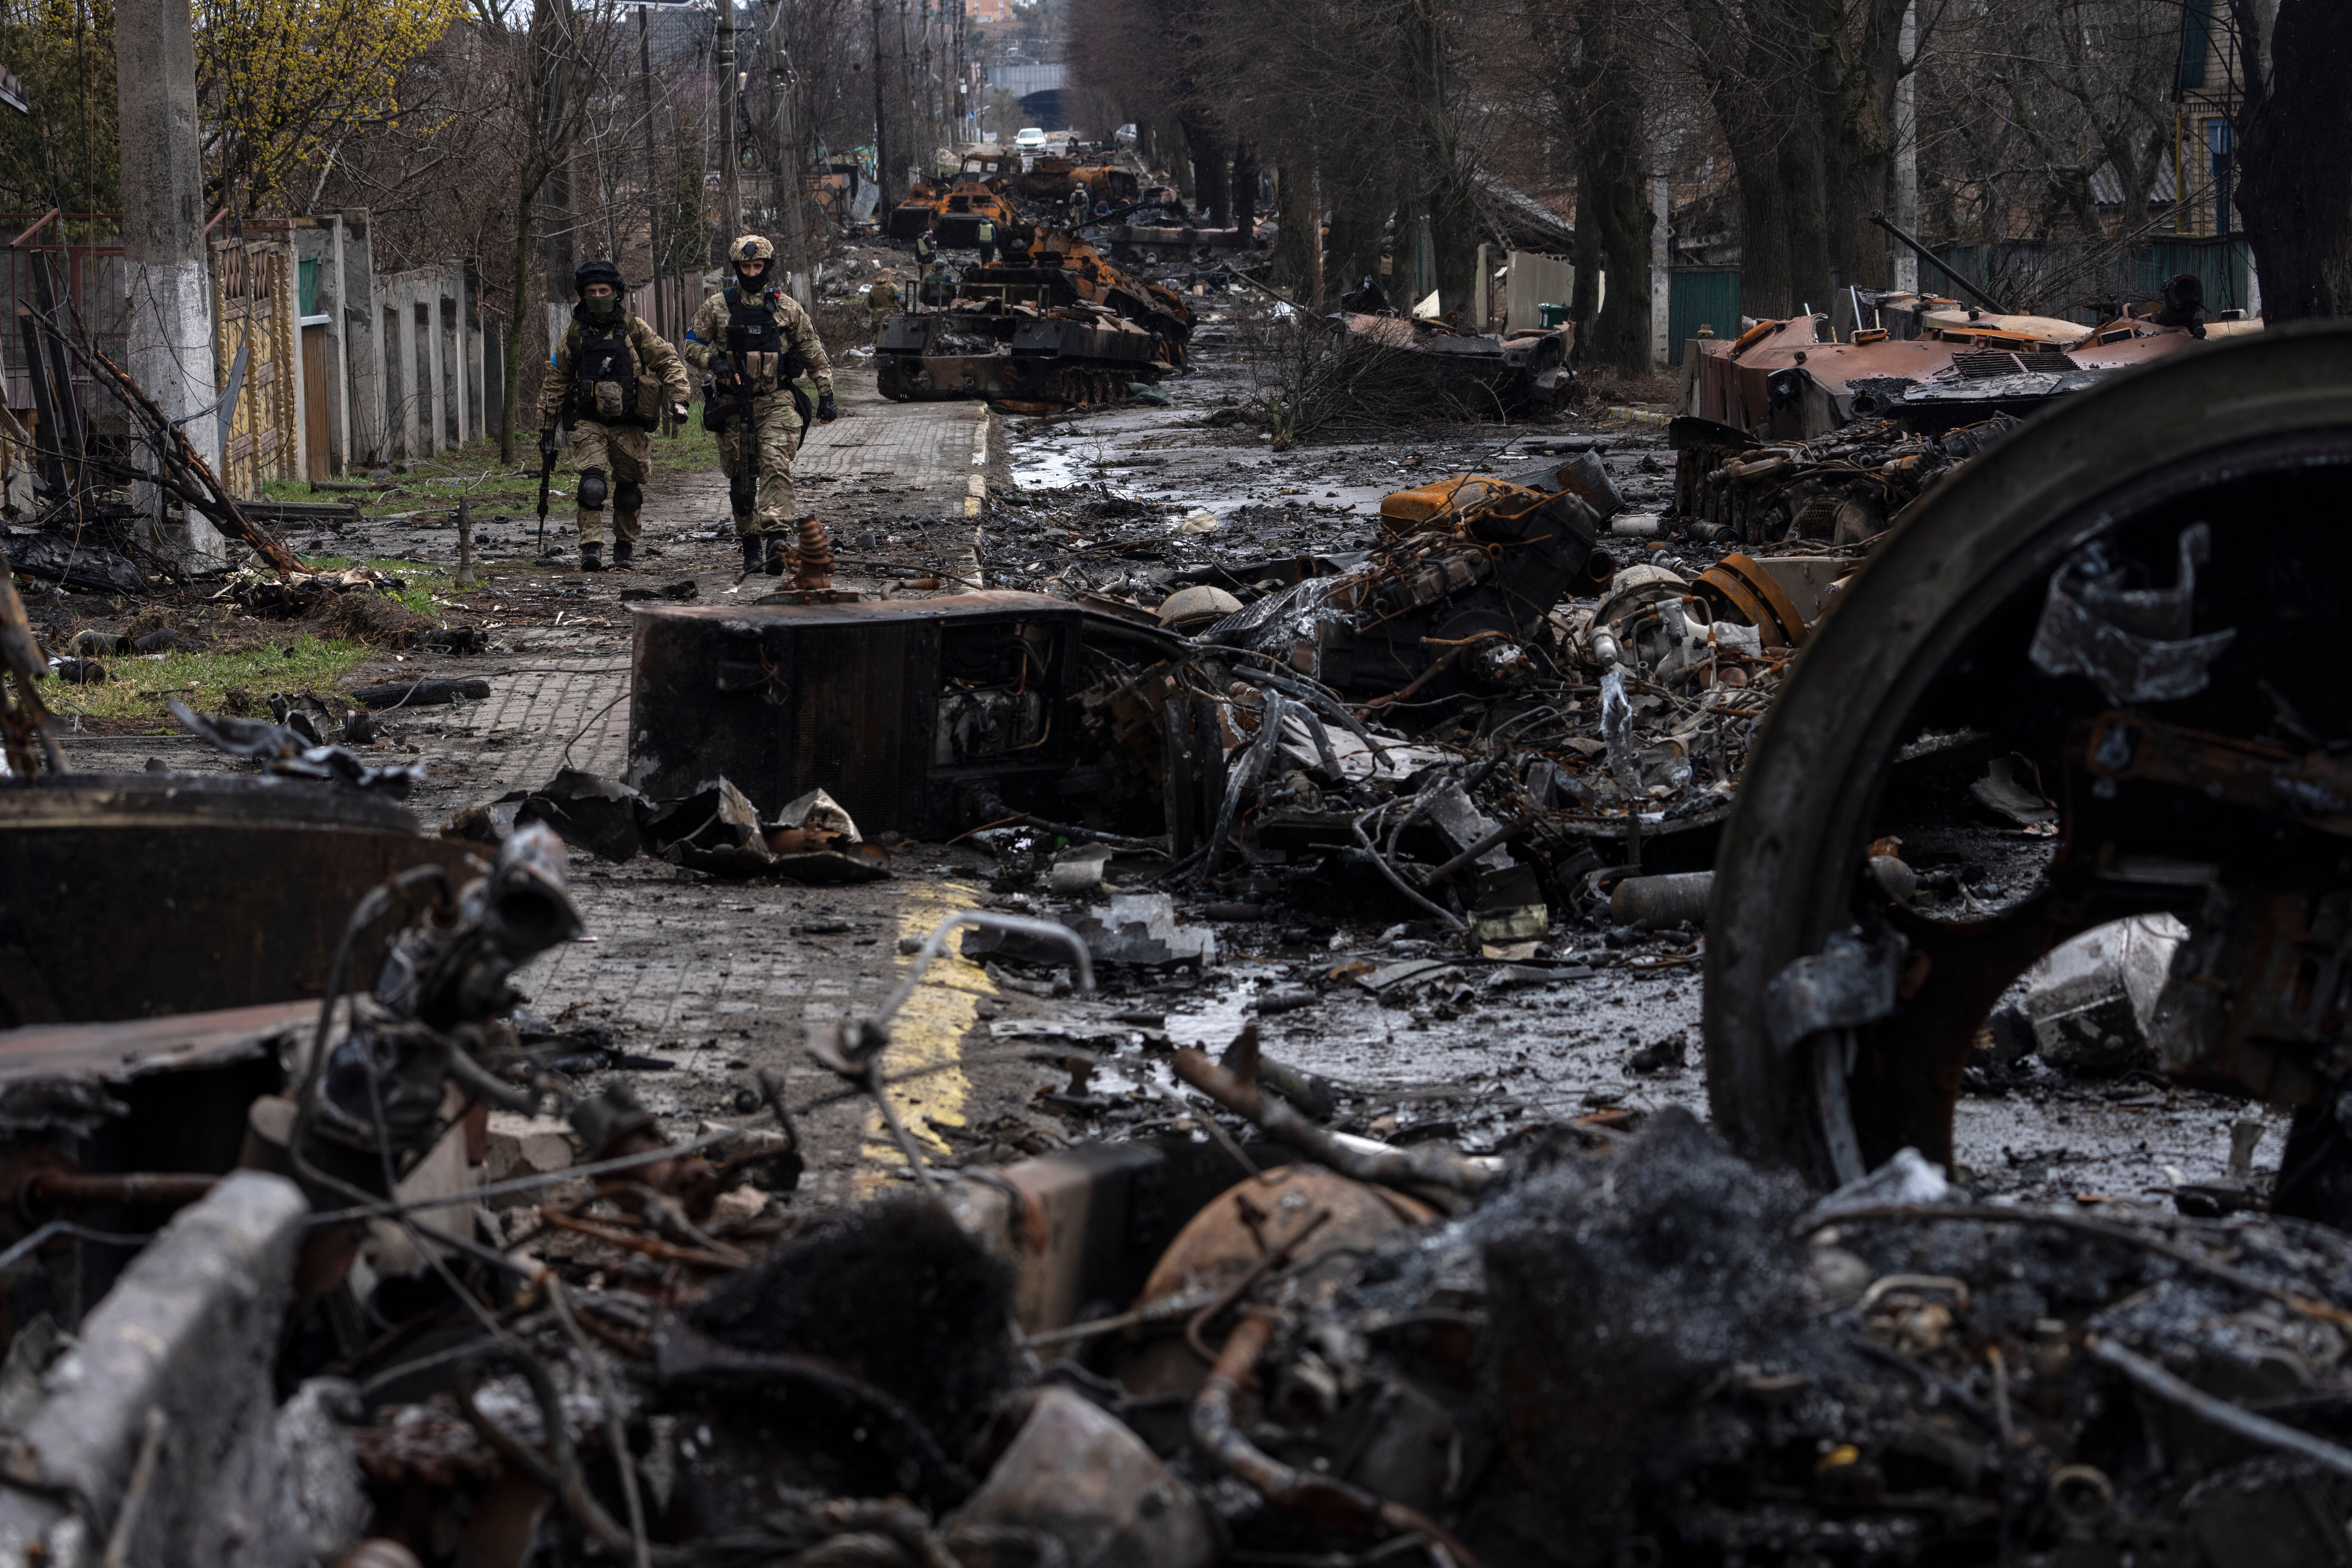 Ukraine accuses Russia of massacre, city strewn with bodies The Independent picture